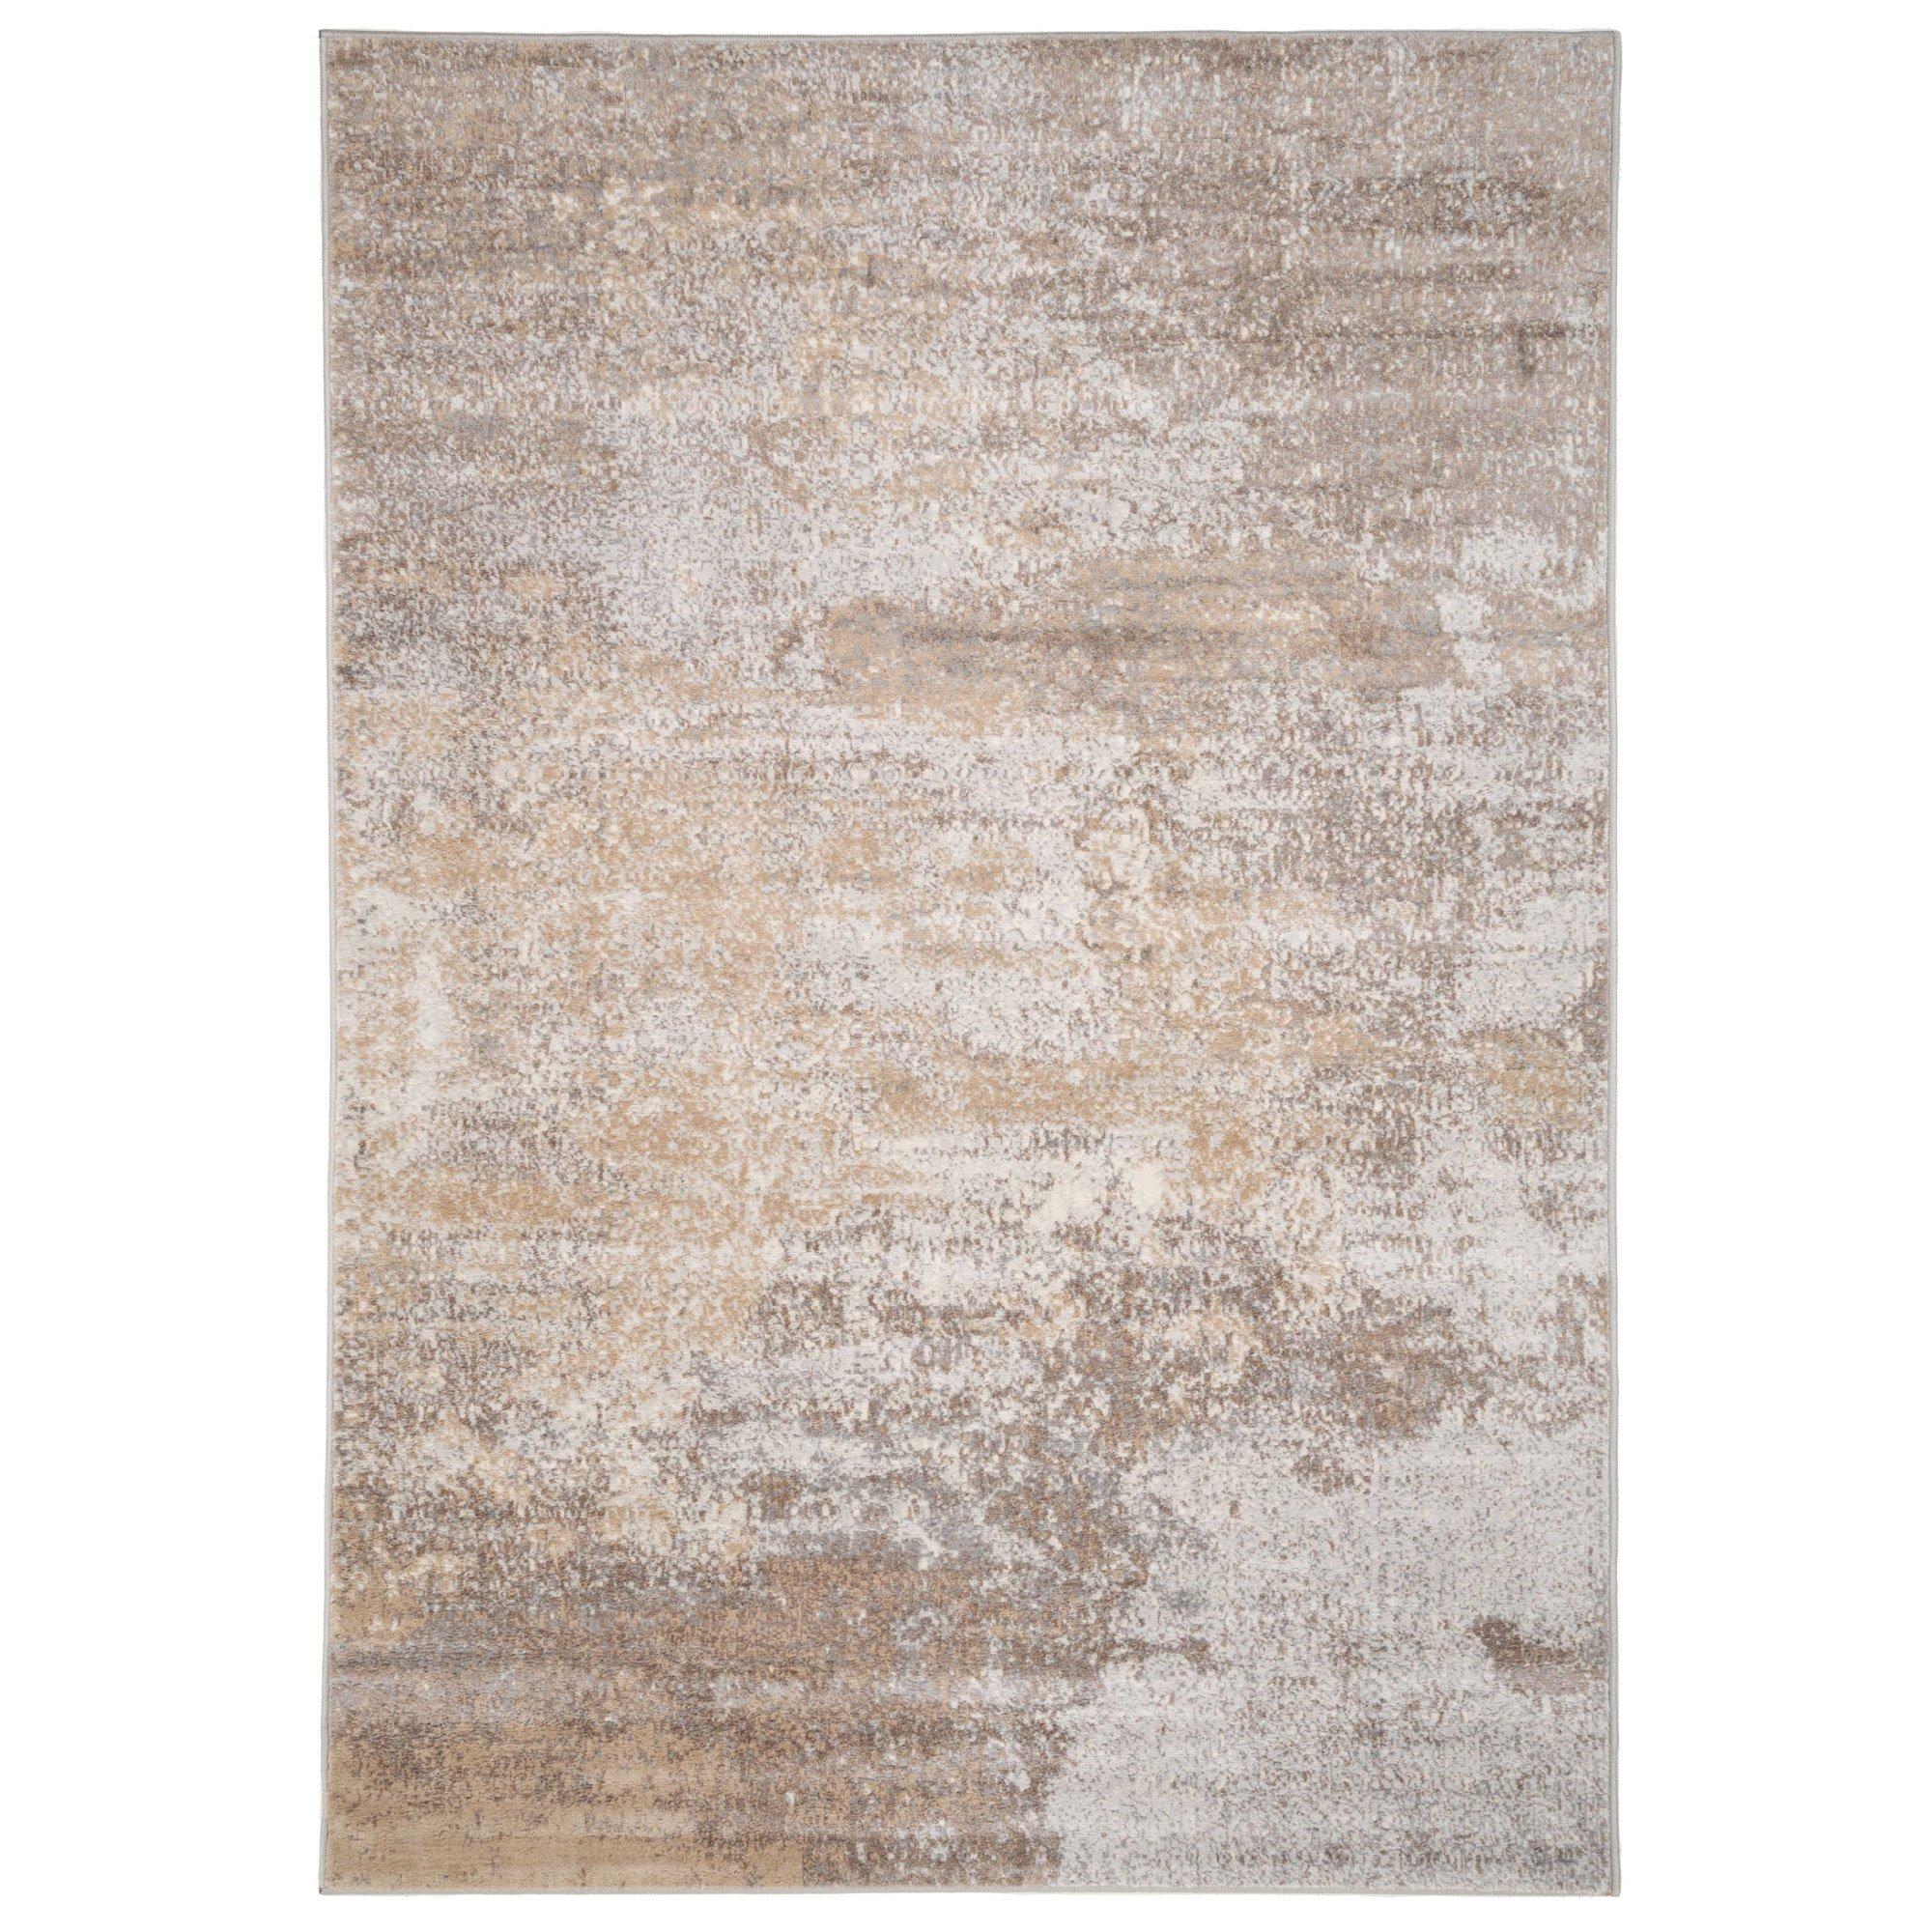 Neutral Beige Distressed Abstract Living Area Rug